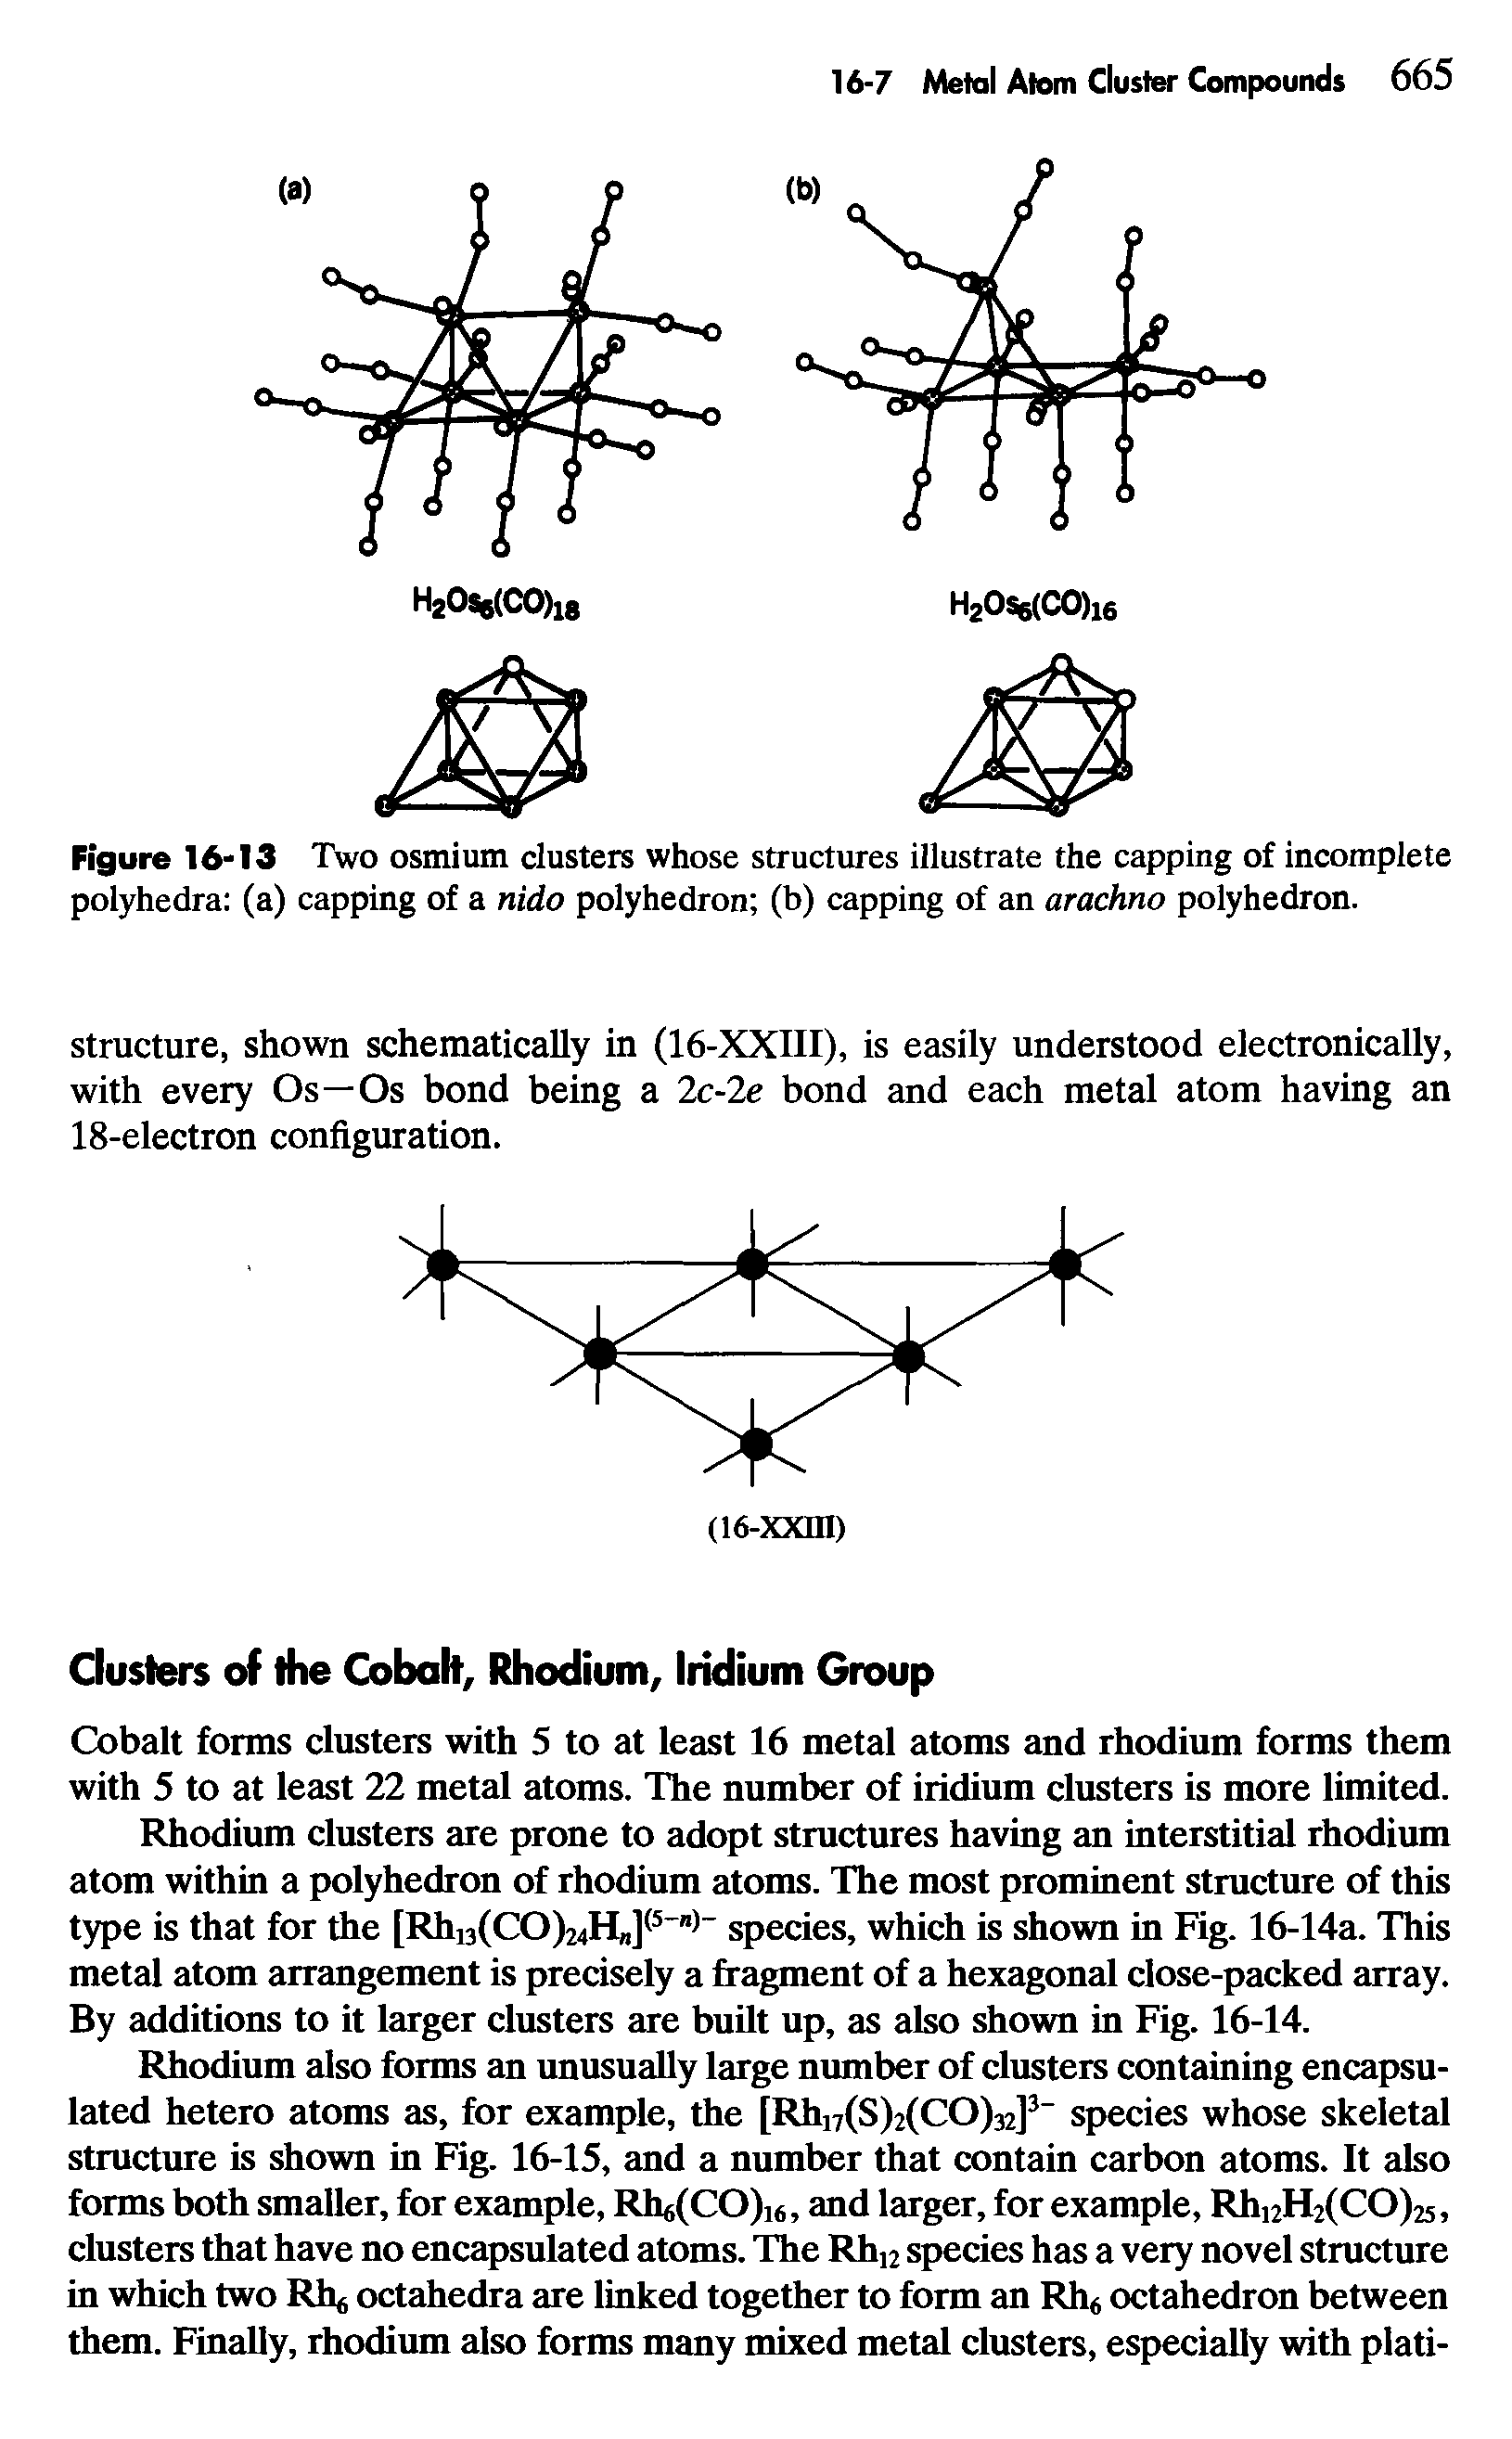 Figure 16-13 Two osmium clusters whose structures illustrate the capping of incomplete polyhedra (a) capping of a nido polyhedron (b) capping of an arachno polyhedron.